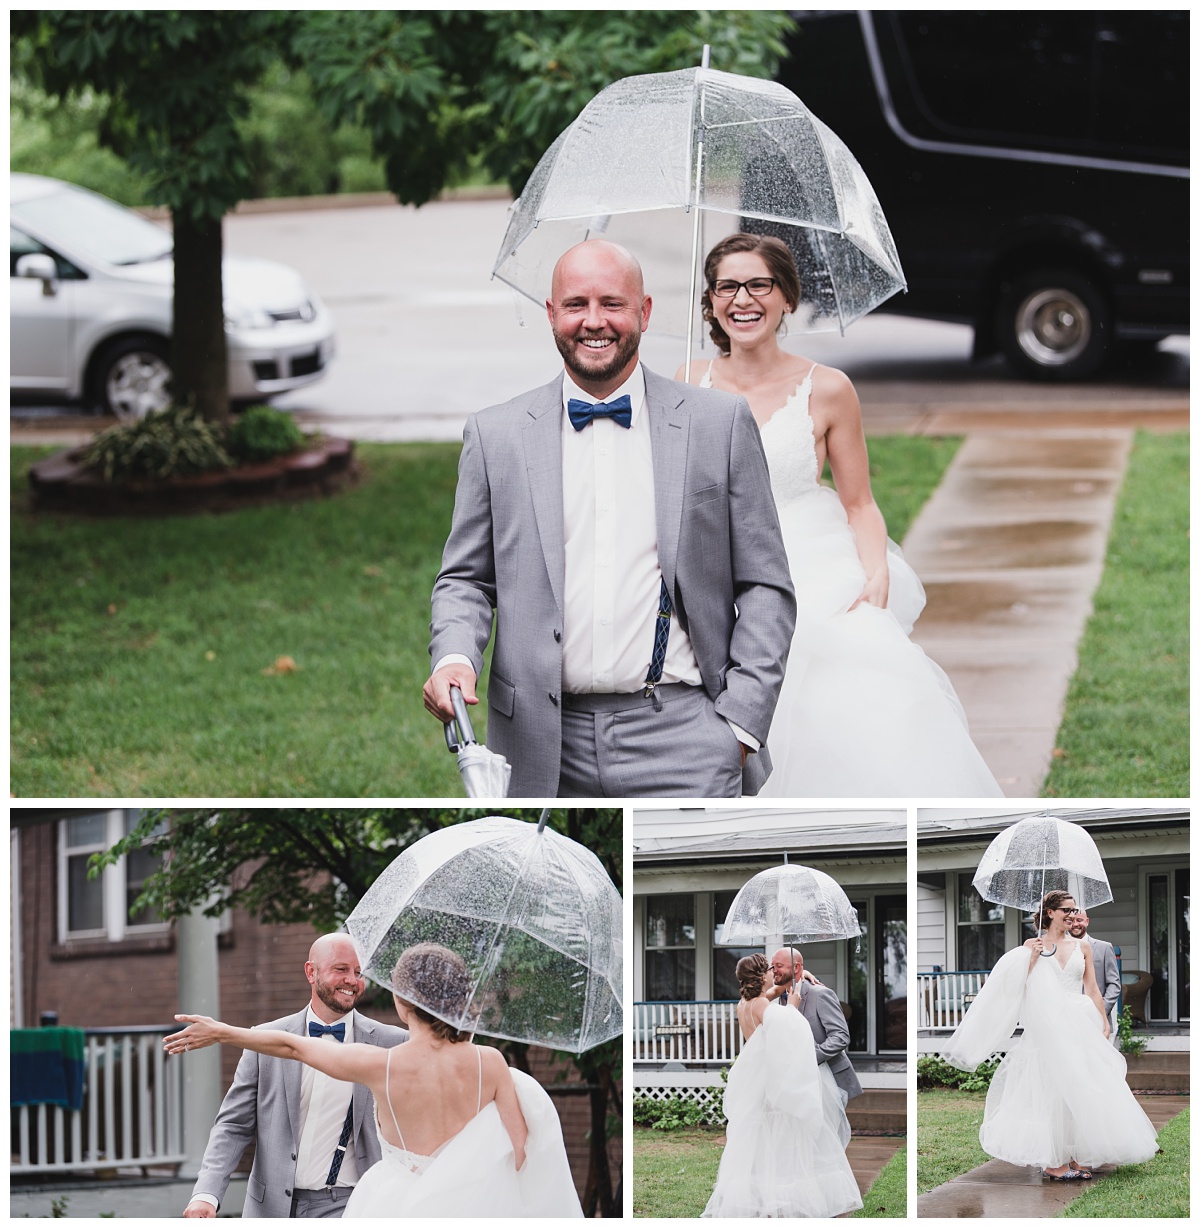 A series of images showing bride and groom sharing a first look in the front yard of their new home.